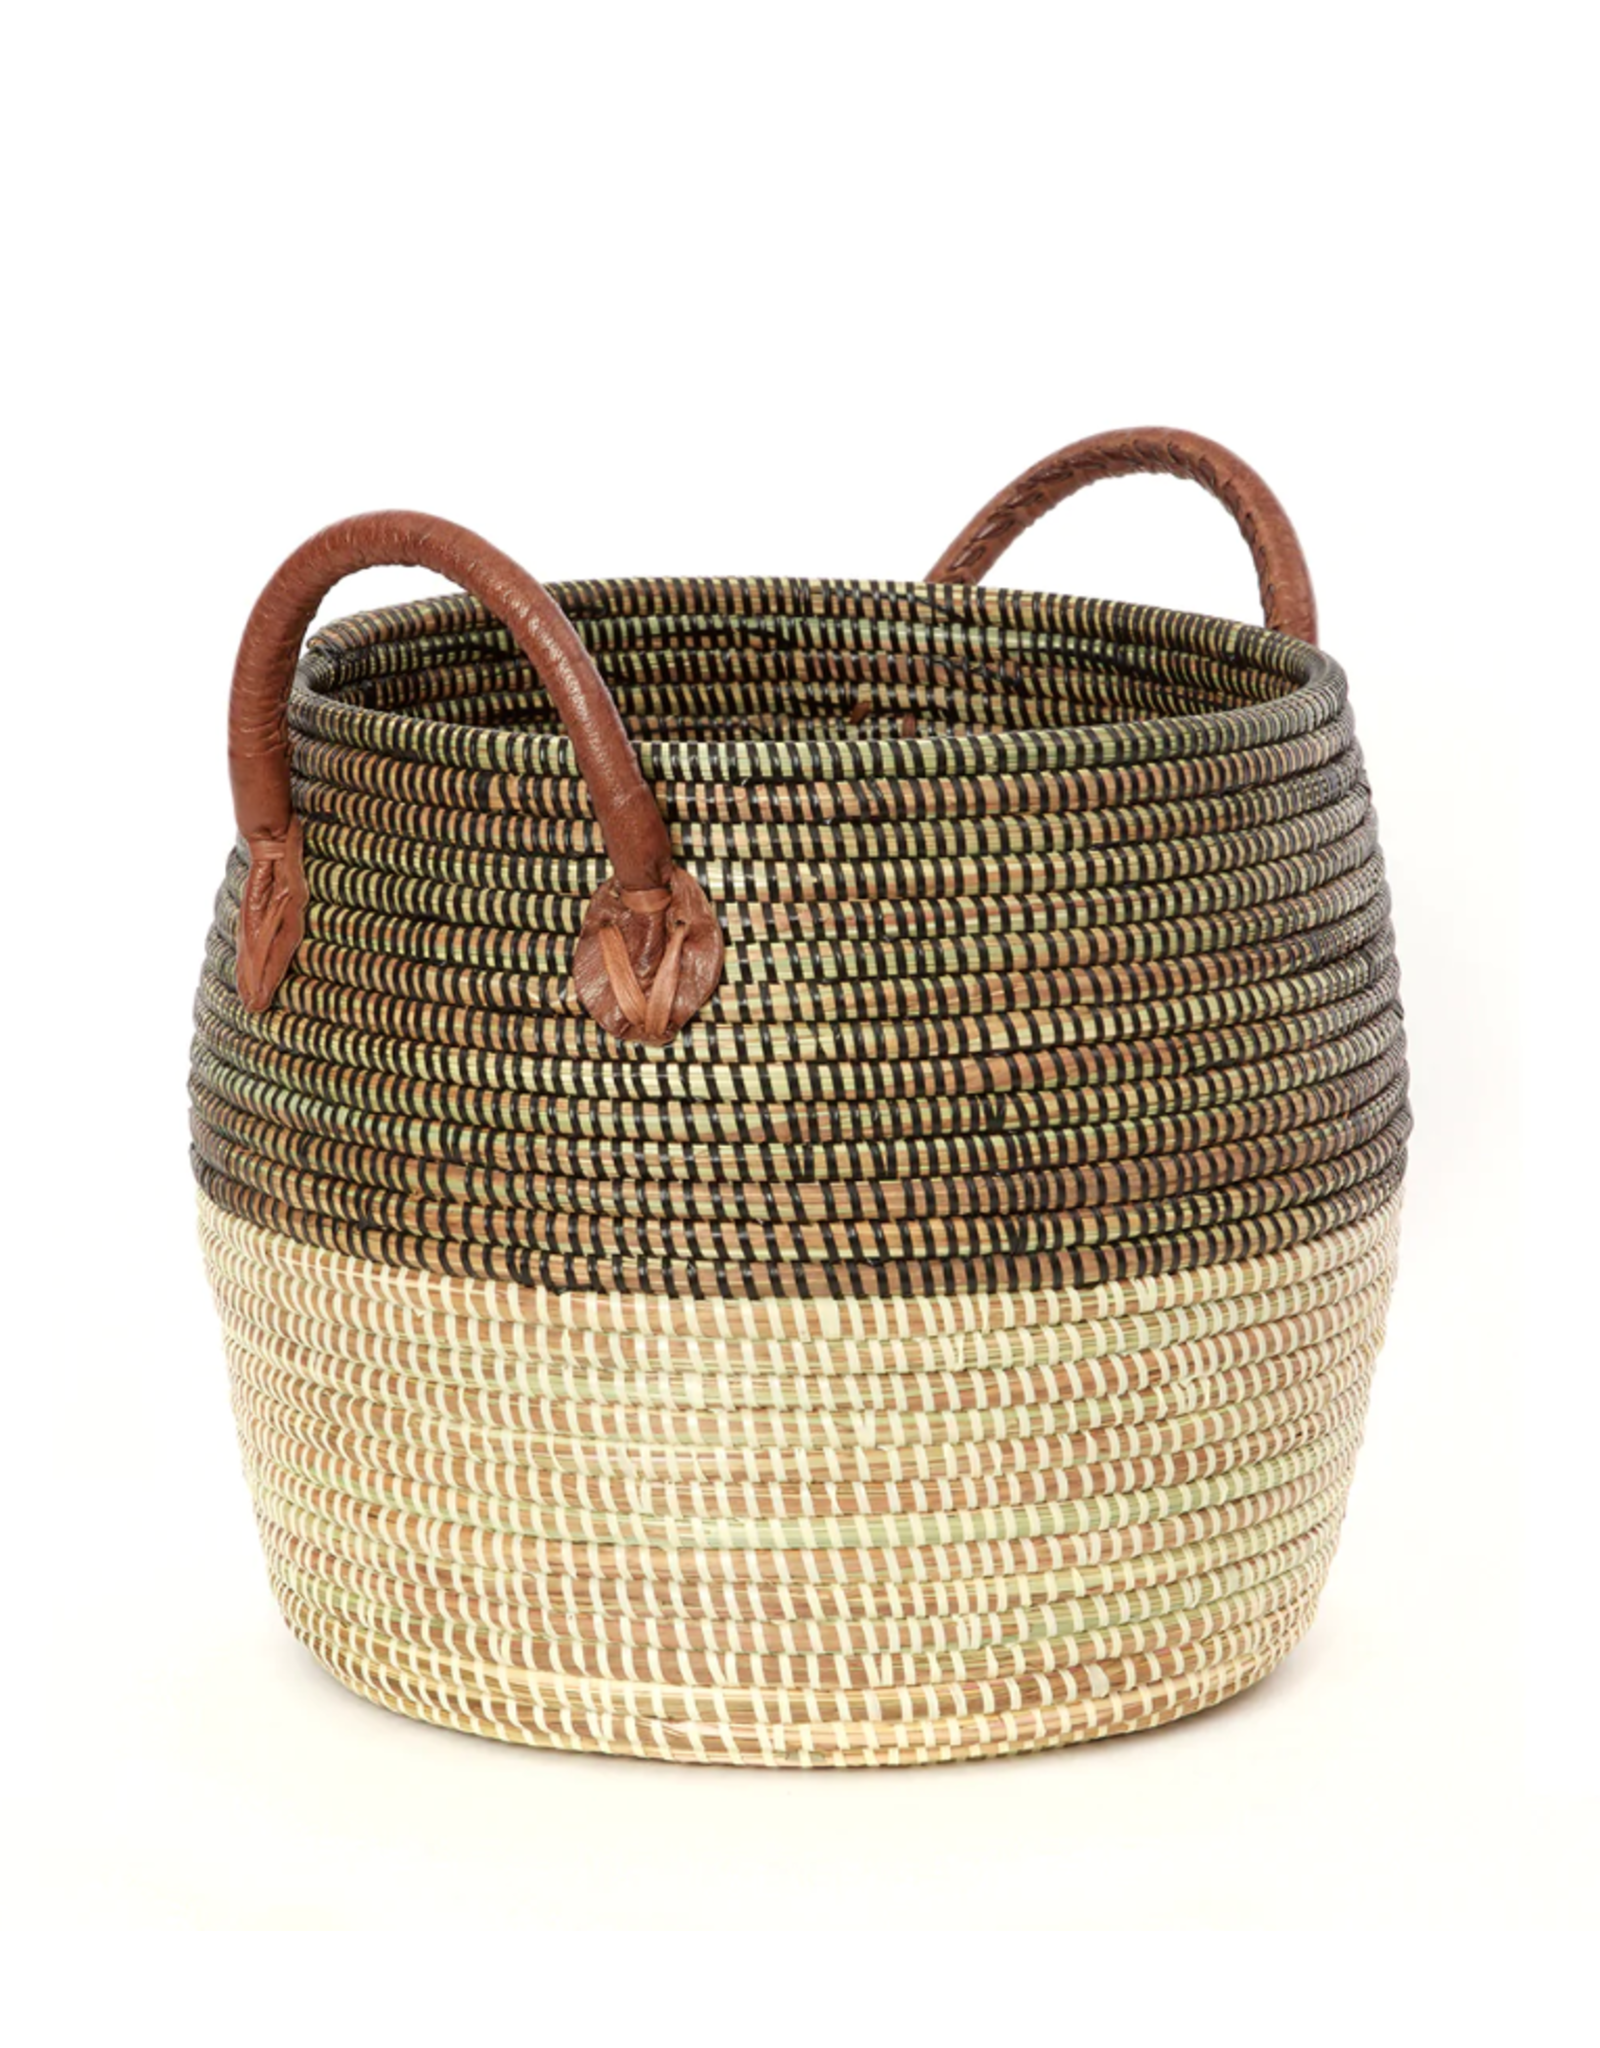 Striped Baskets with Leather Handles